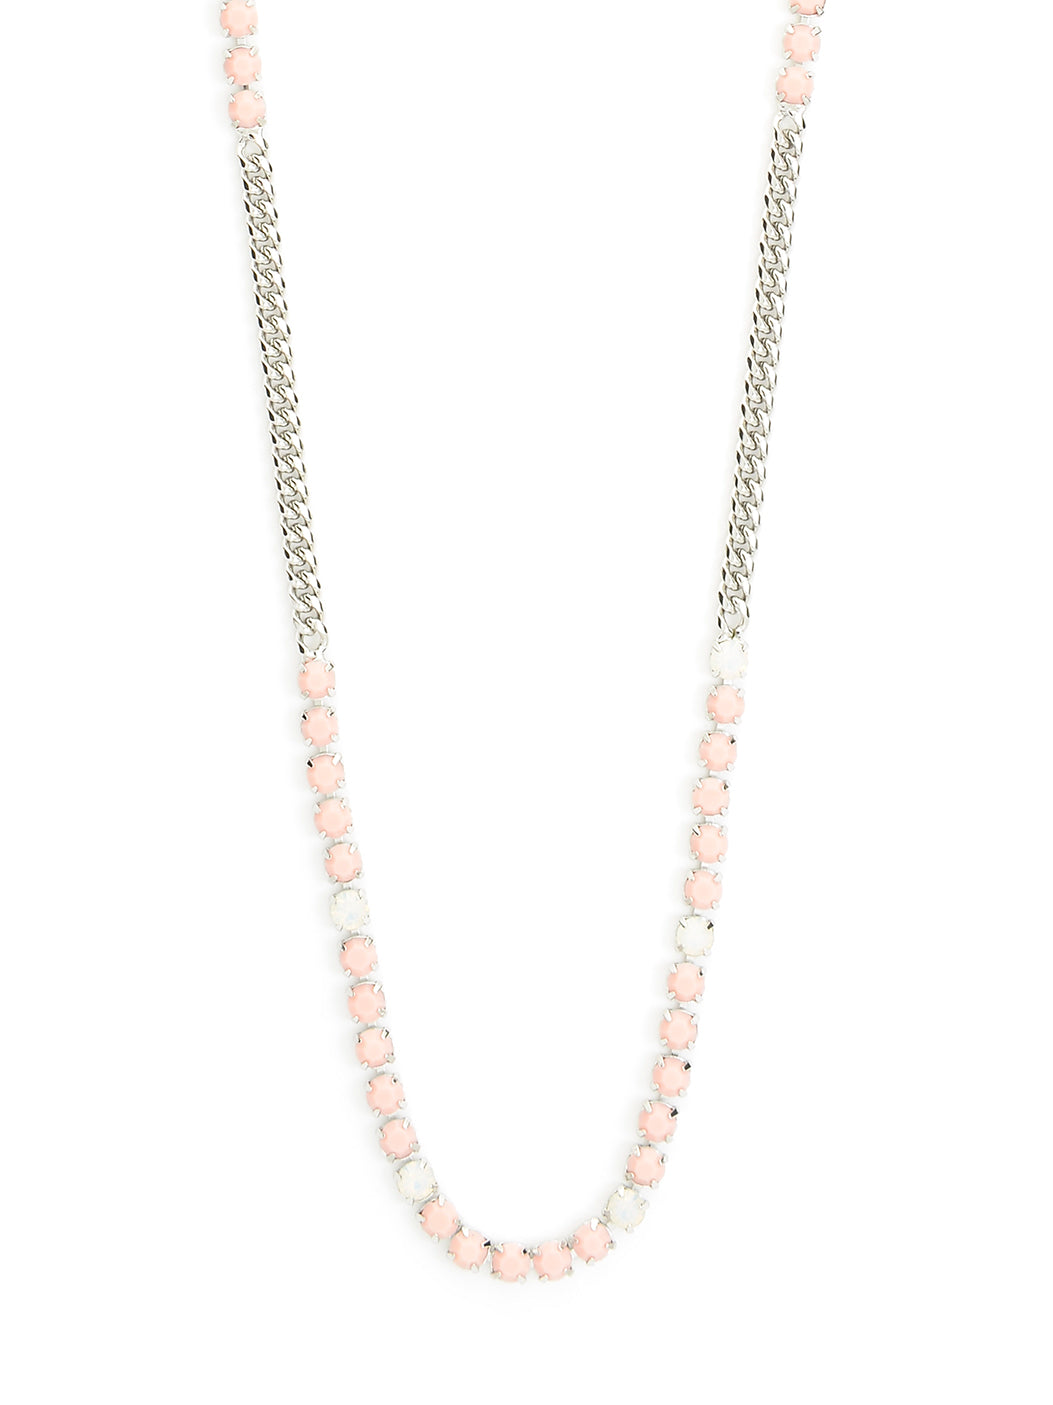 Silver and Pastel Necklace - 2 colors